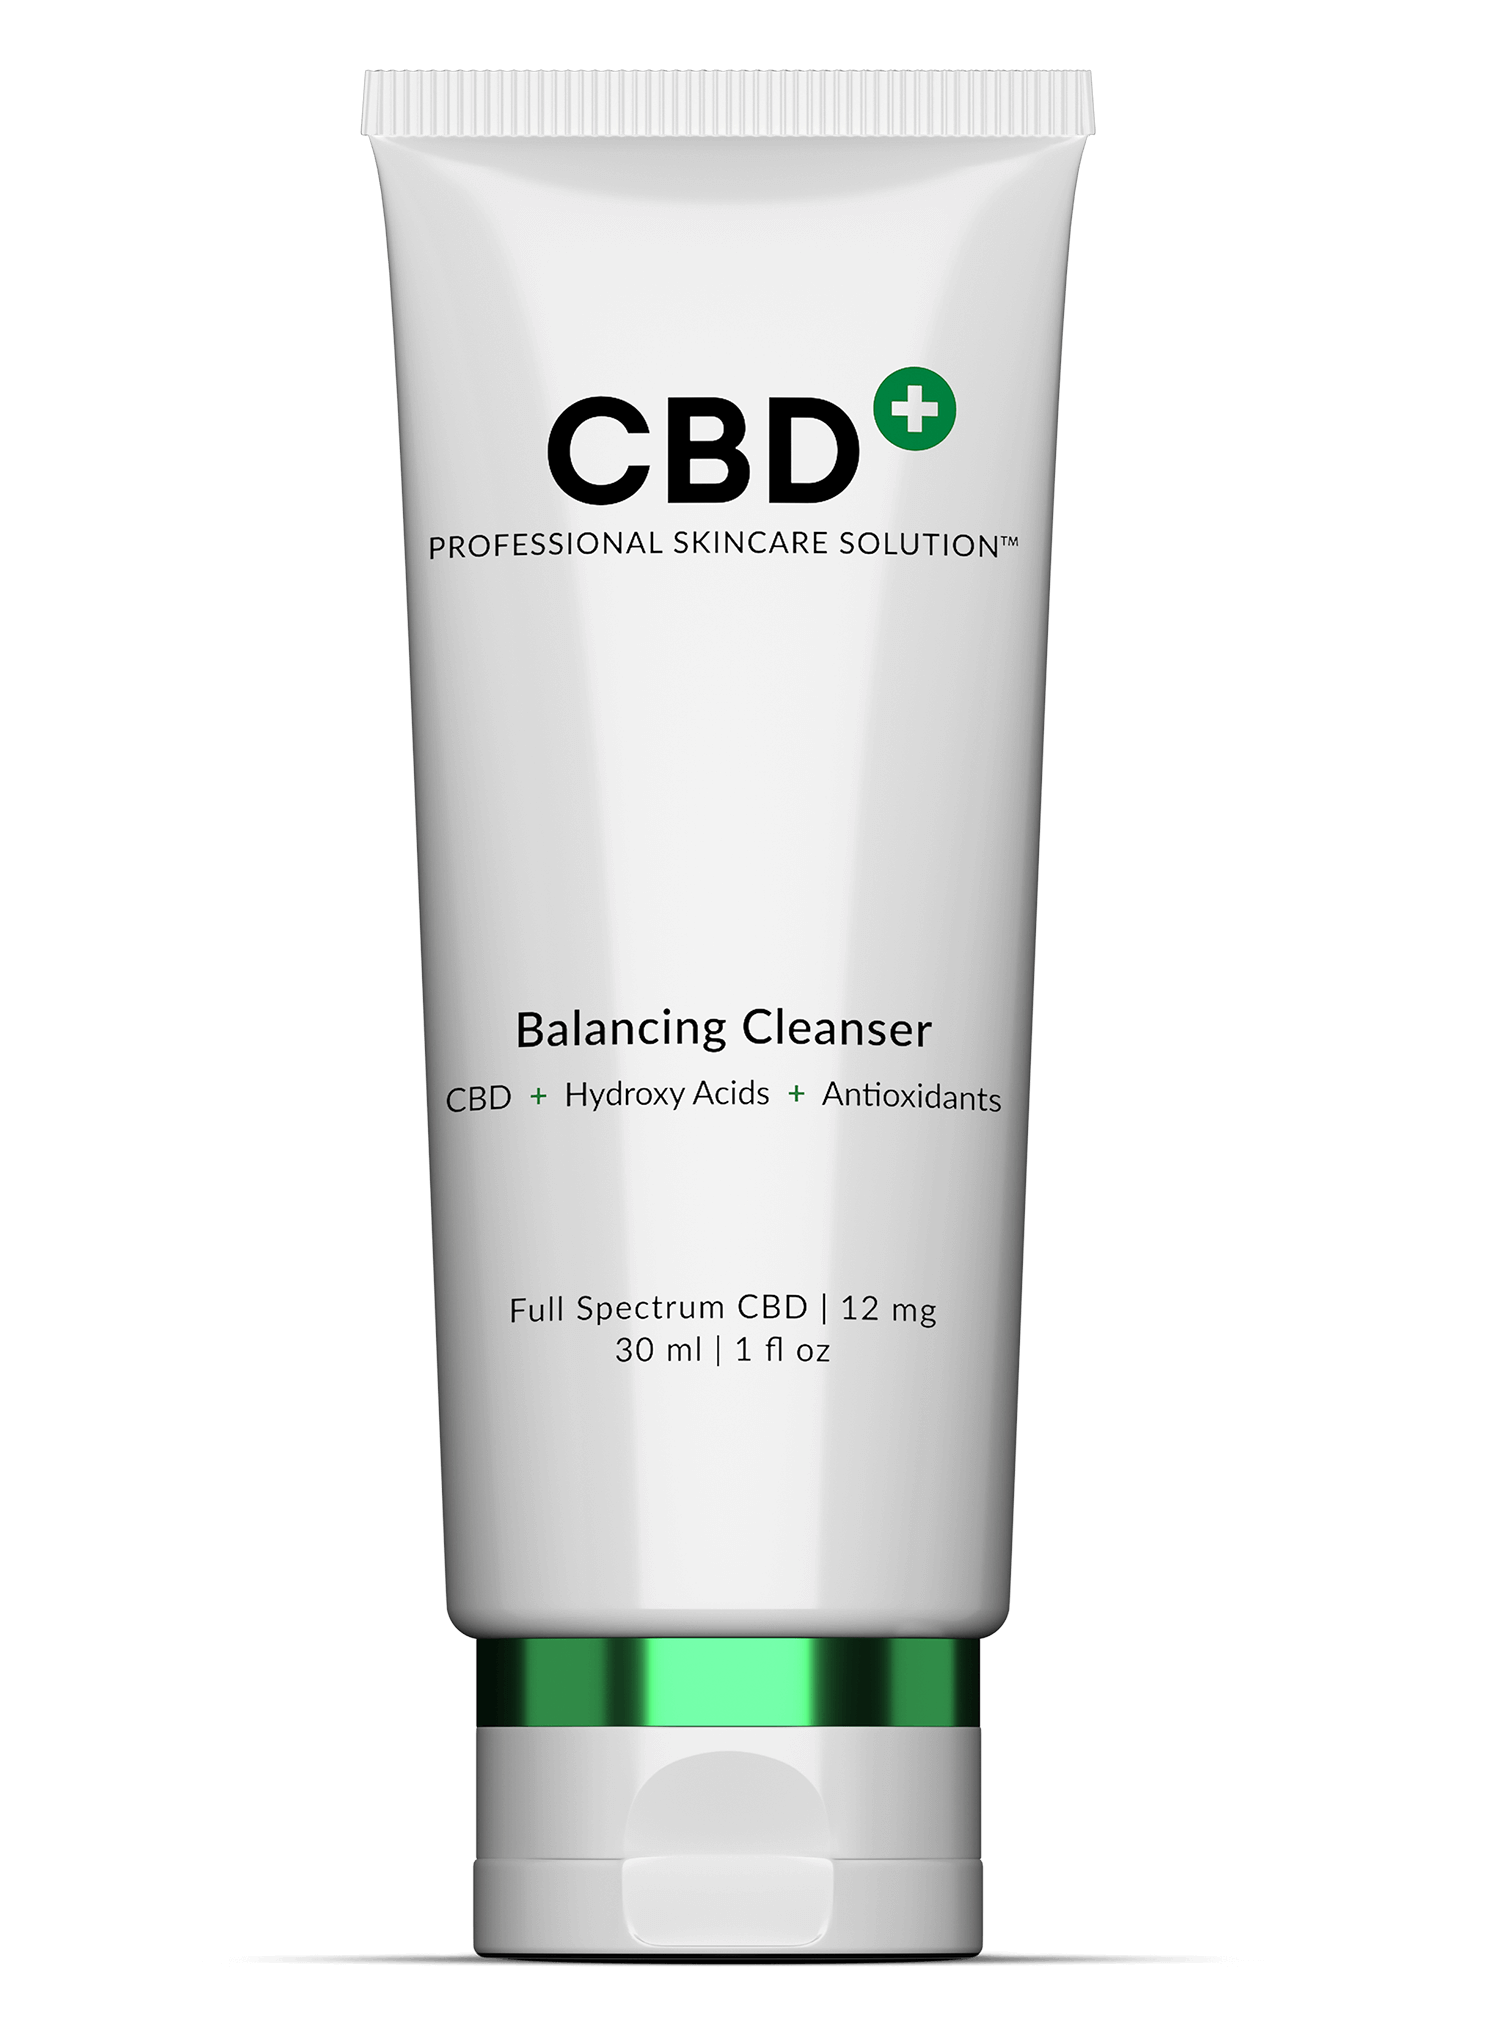 Anti-aging CBD+ skincare solution kit including Balancing Cleanser, AM Exfoliating Pads and Barrier Balancing Hydrator 